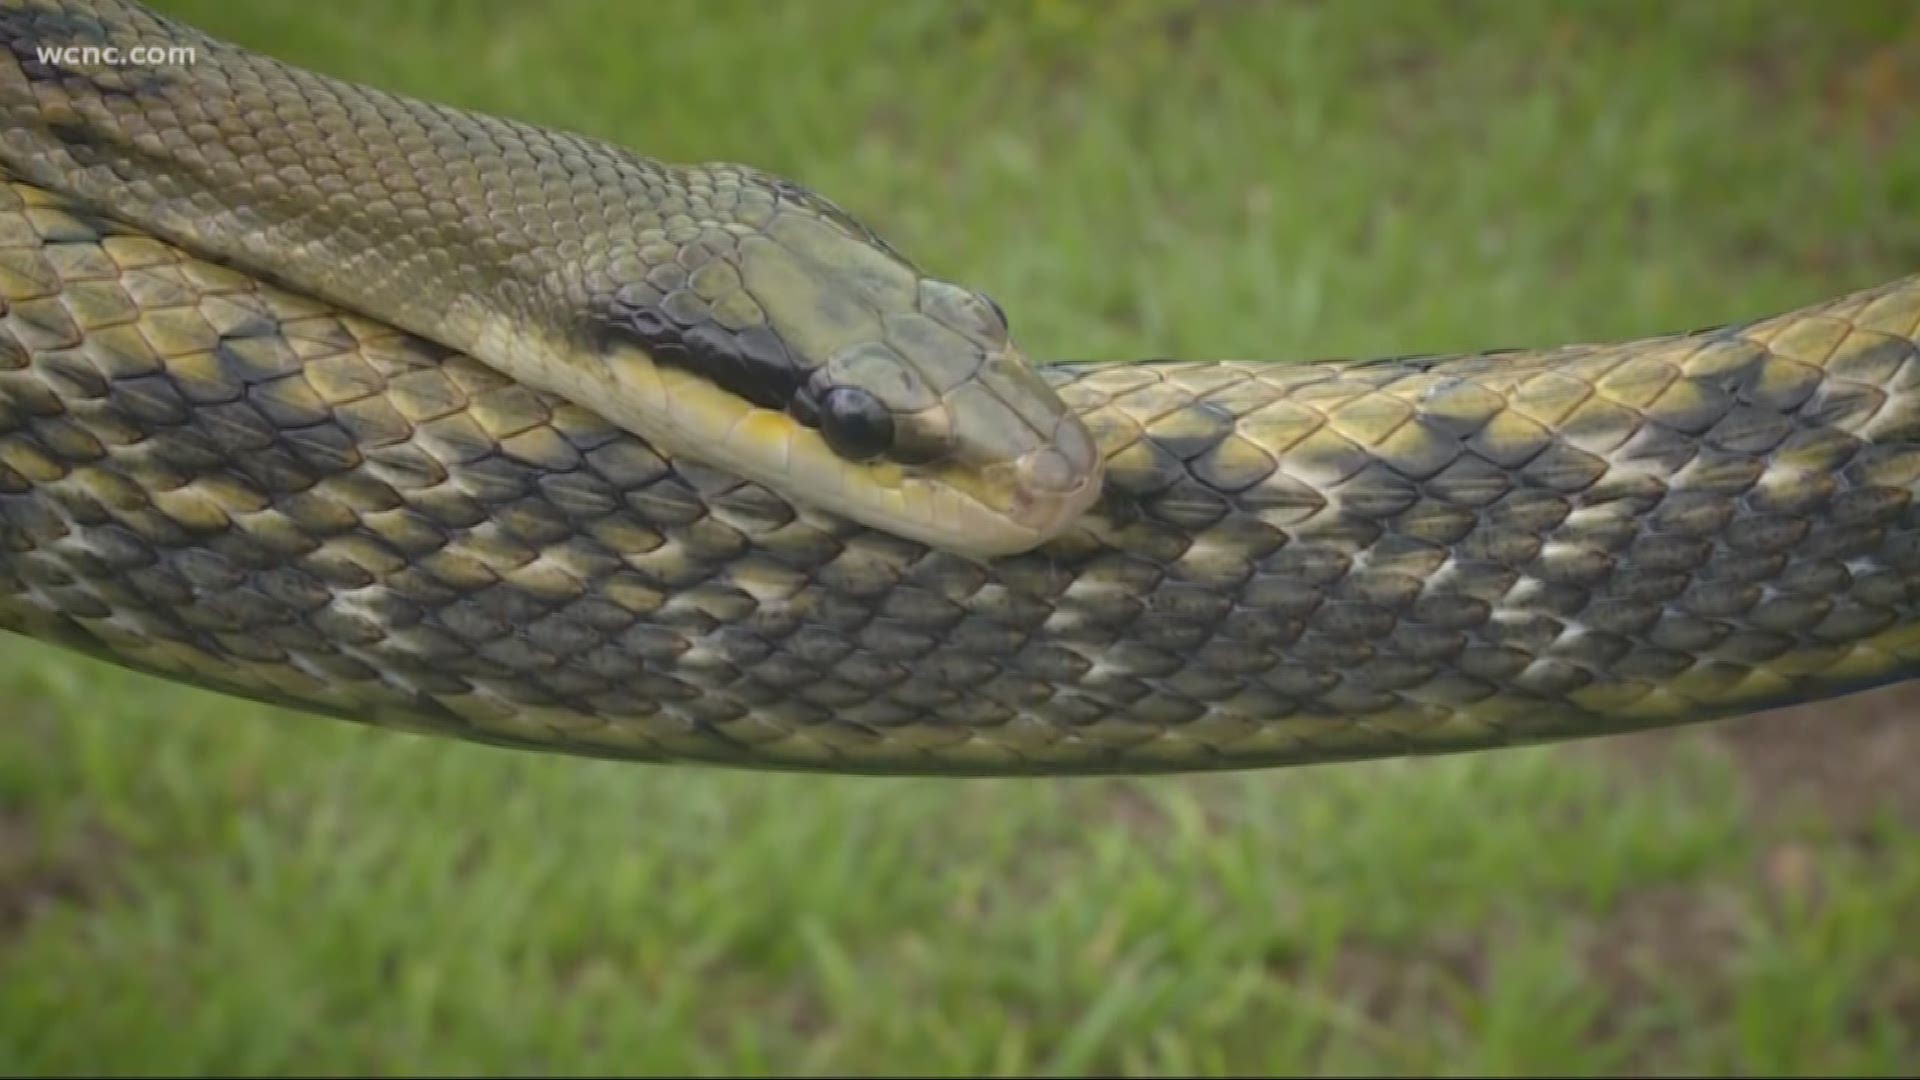 Snakes have been spotted on balconies, inside birdhouses and homes across the Carolinas. NBC Charlotte's Evan West is finding out these snakes are actually helpful.